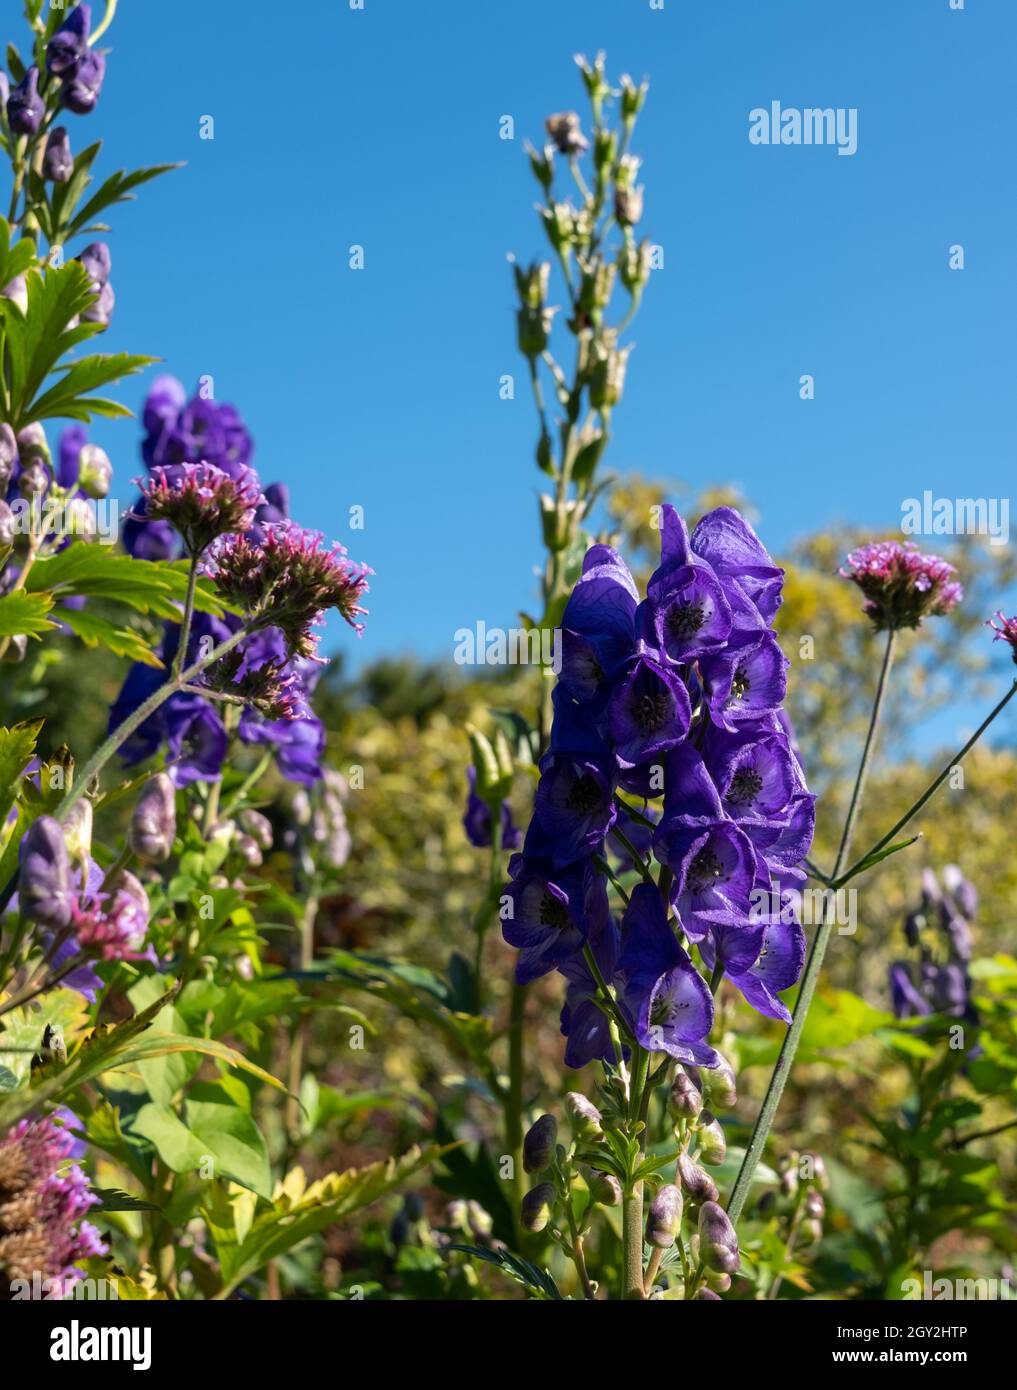 Purple Aconitum Volubile flowers, photographed in autumn in the St John's Lodge garden, located in the Inner Circle, Regent's Park, London UK Stock Photo